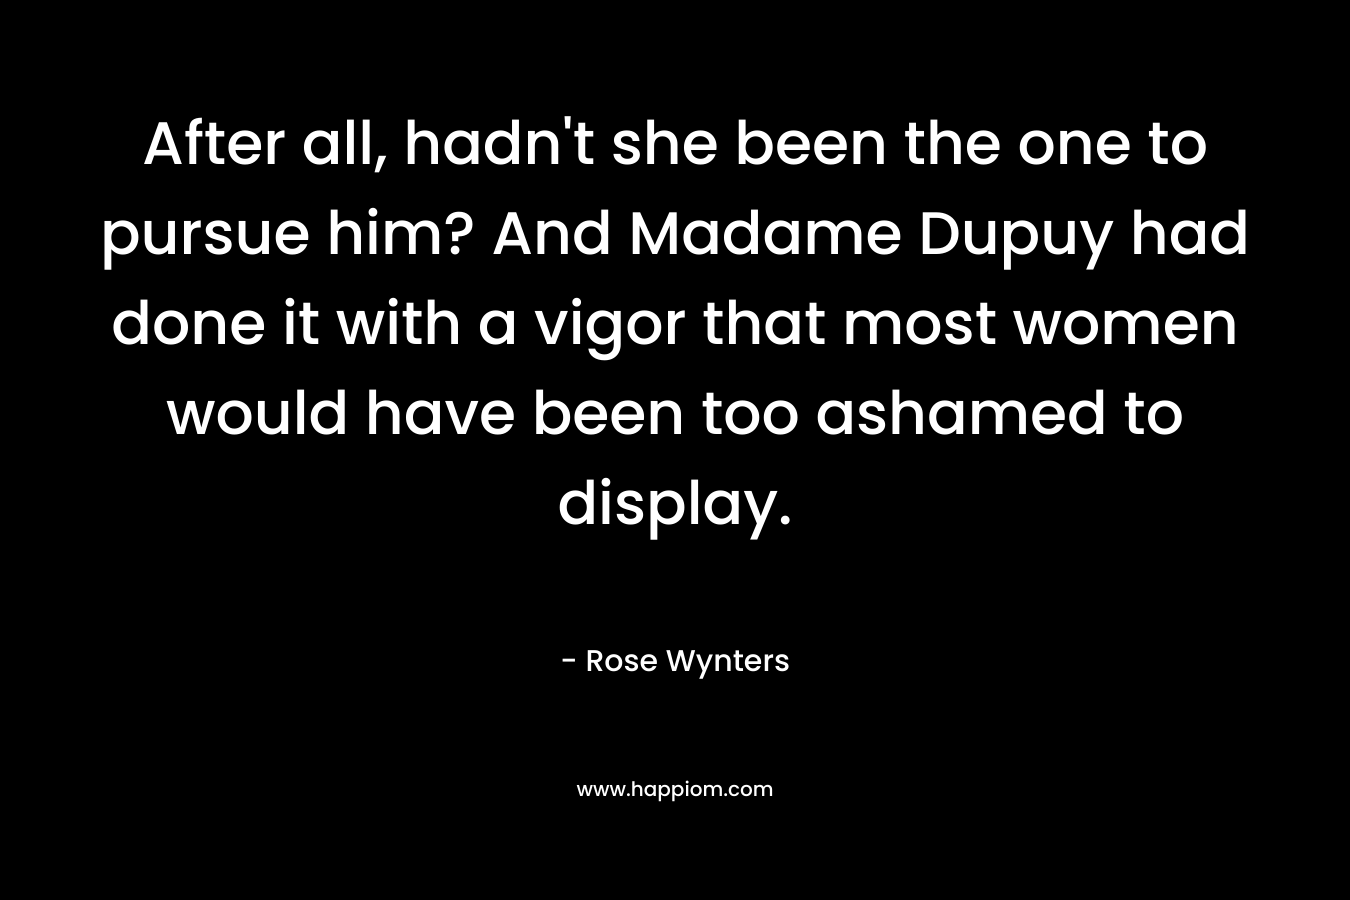 After all, hadn’t she been the one to pursue him? And Madame Dupuy had done it with a vigor that most women would have been too ashamed to display. – Rose Wynters